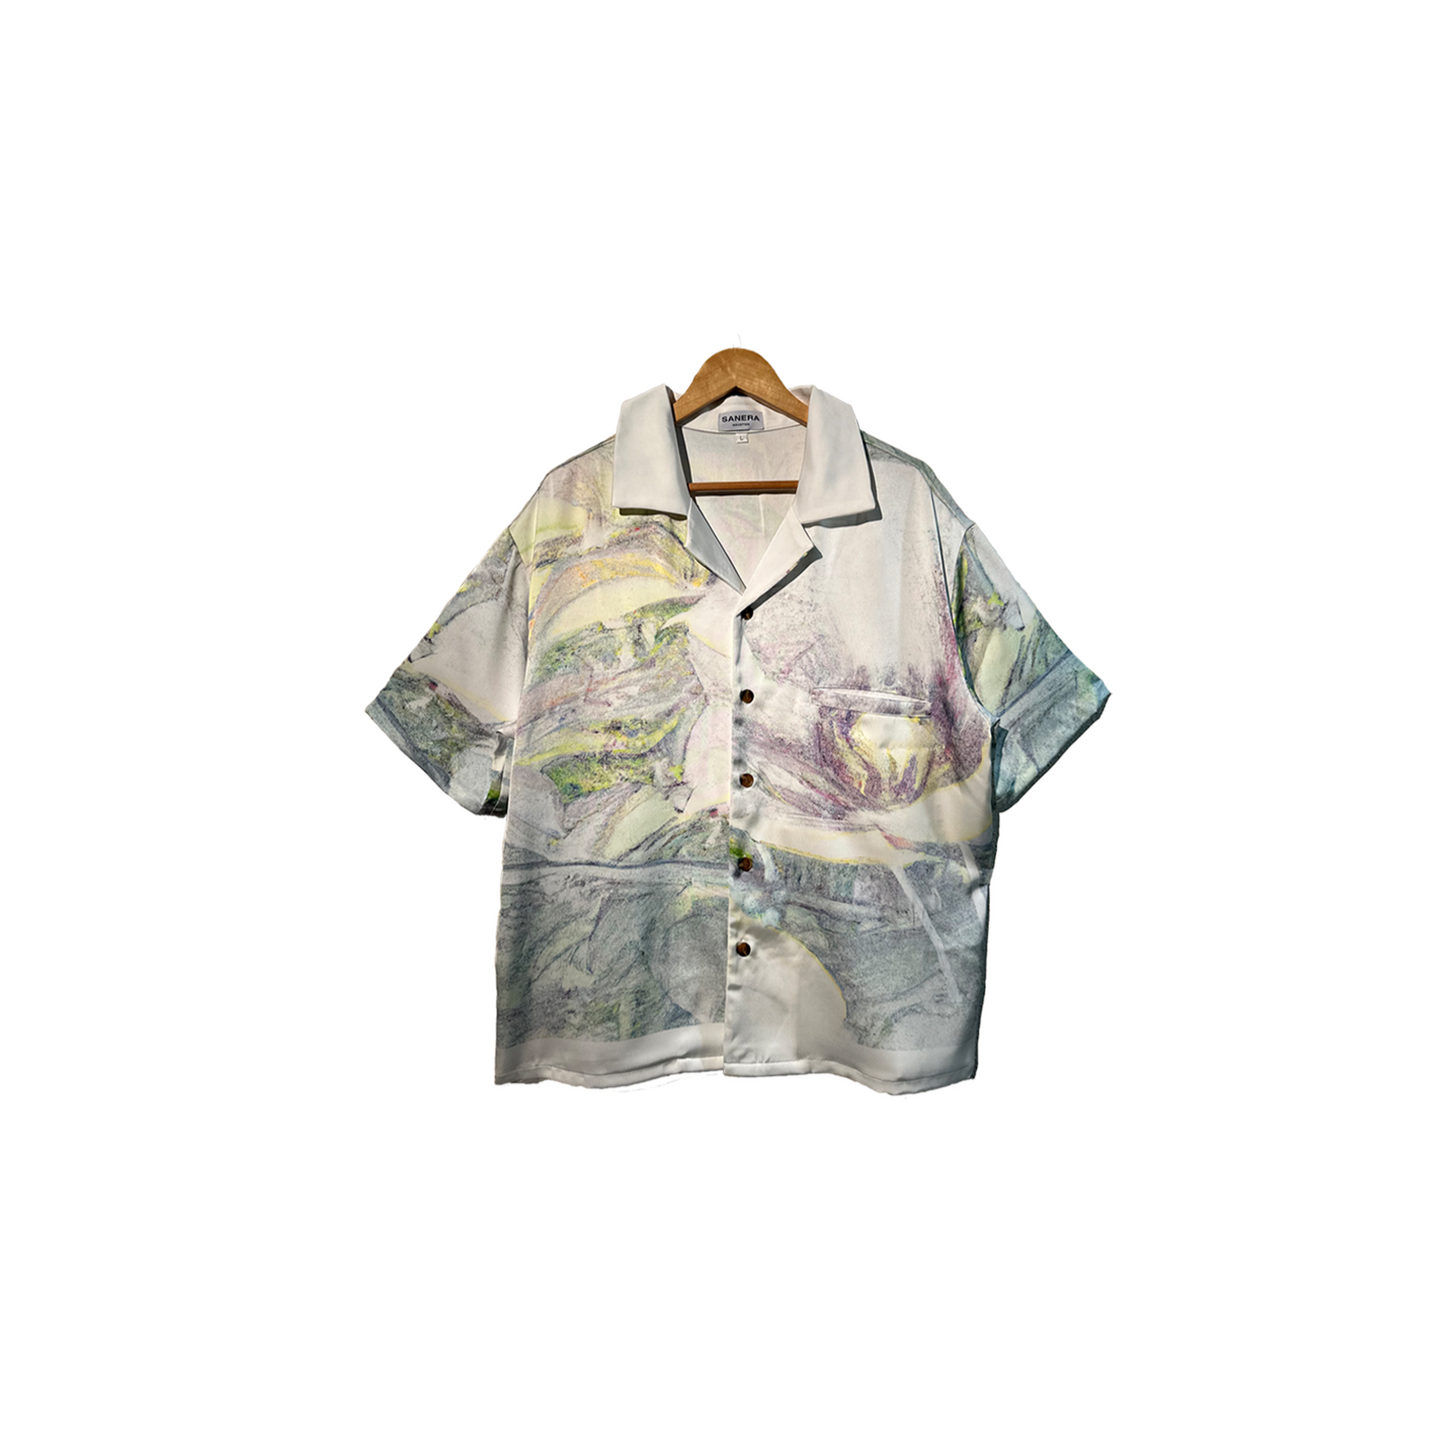 Floral Phase button up